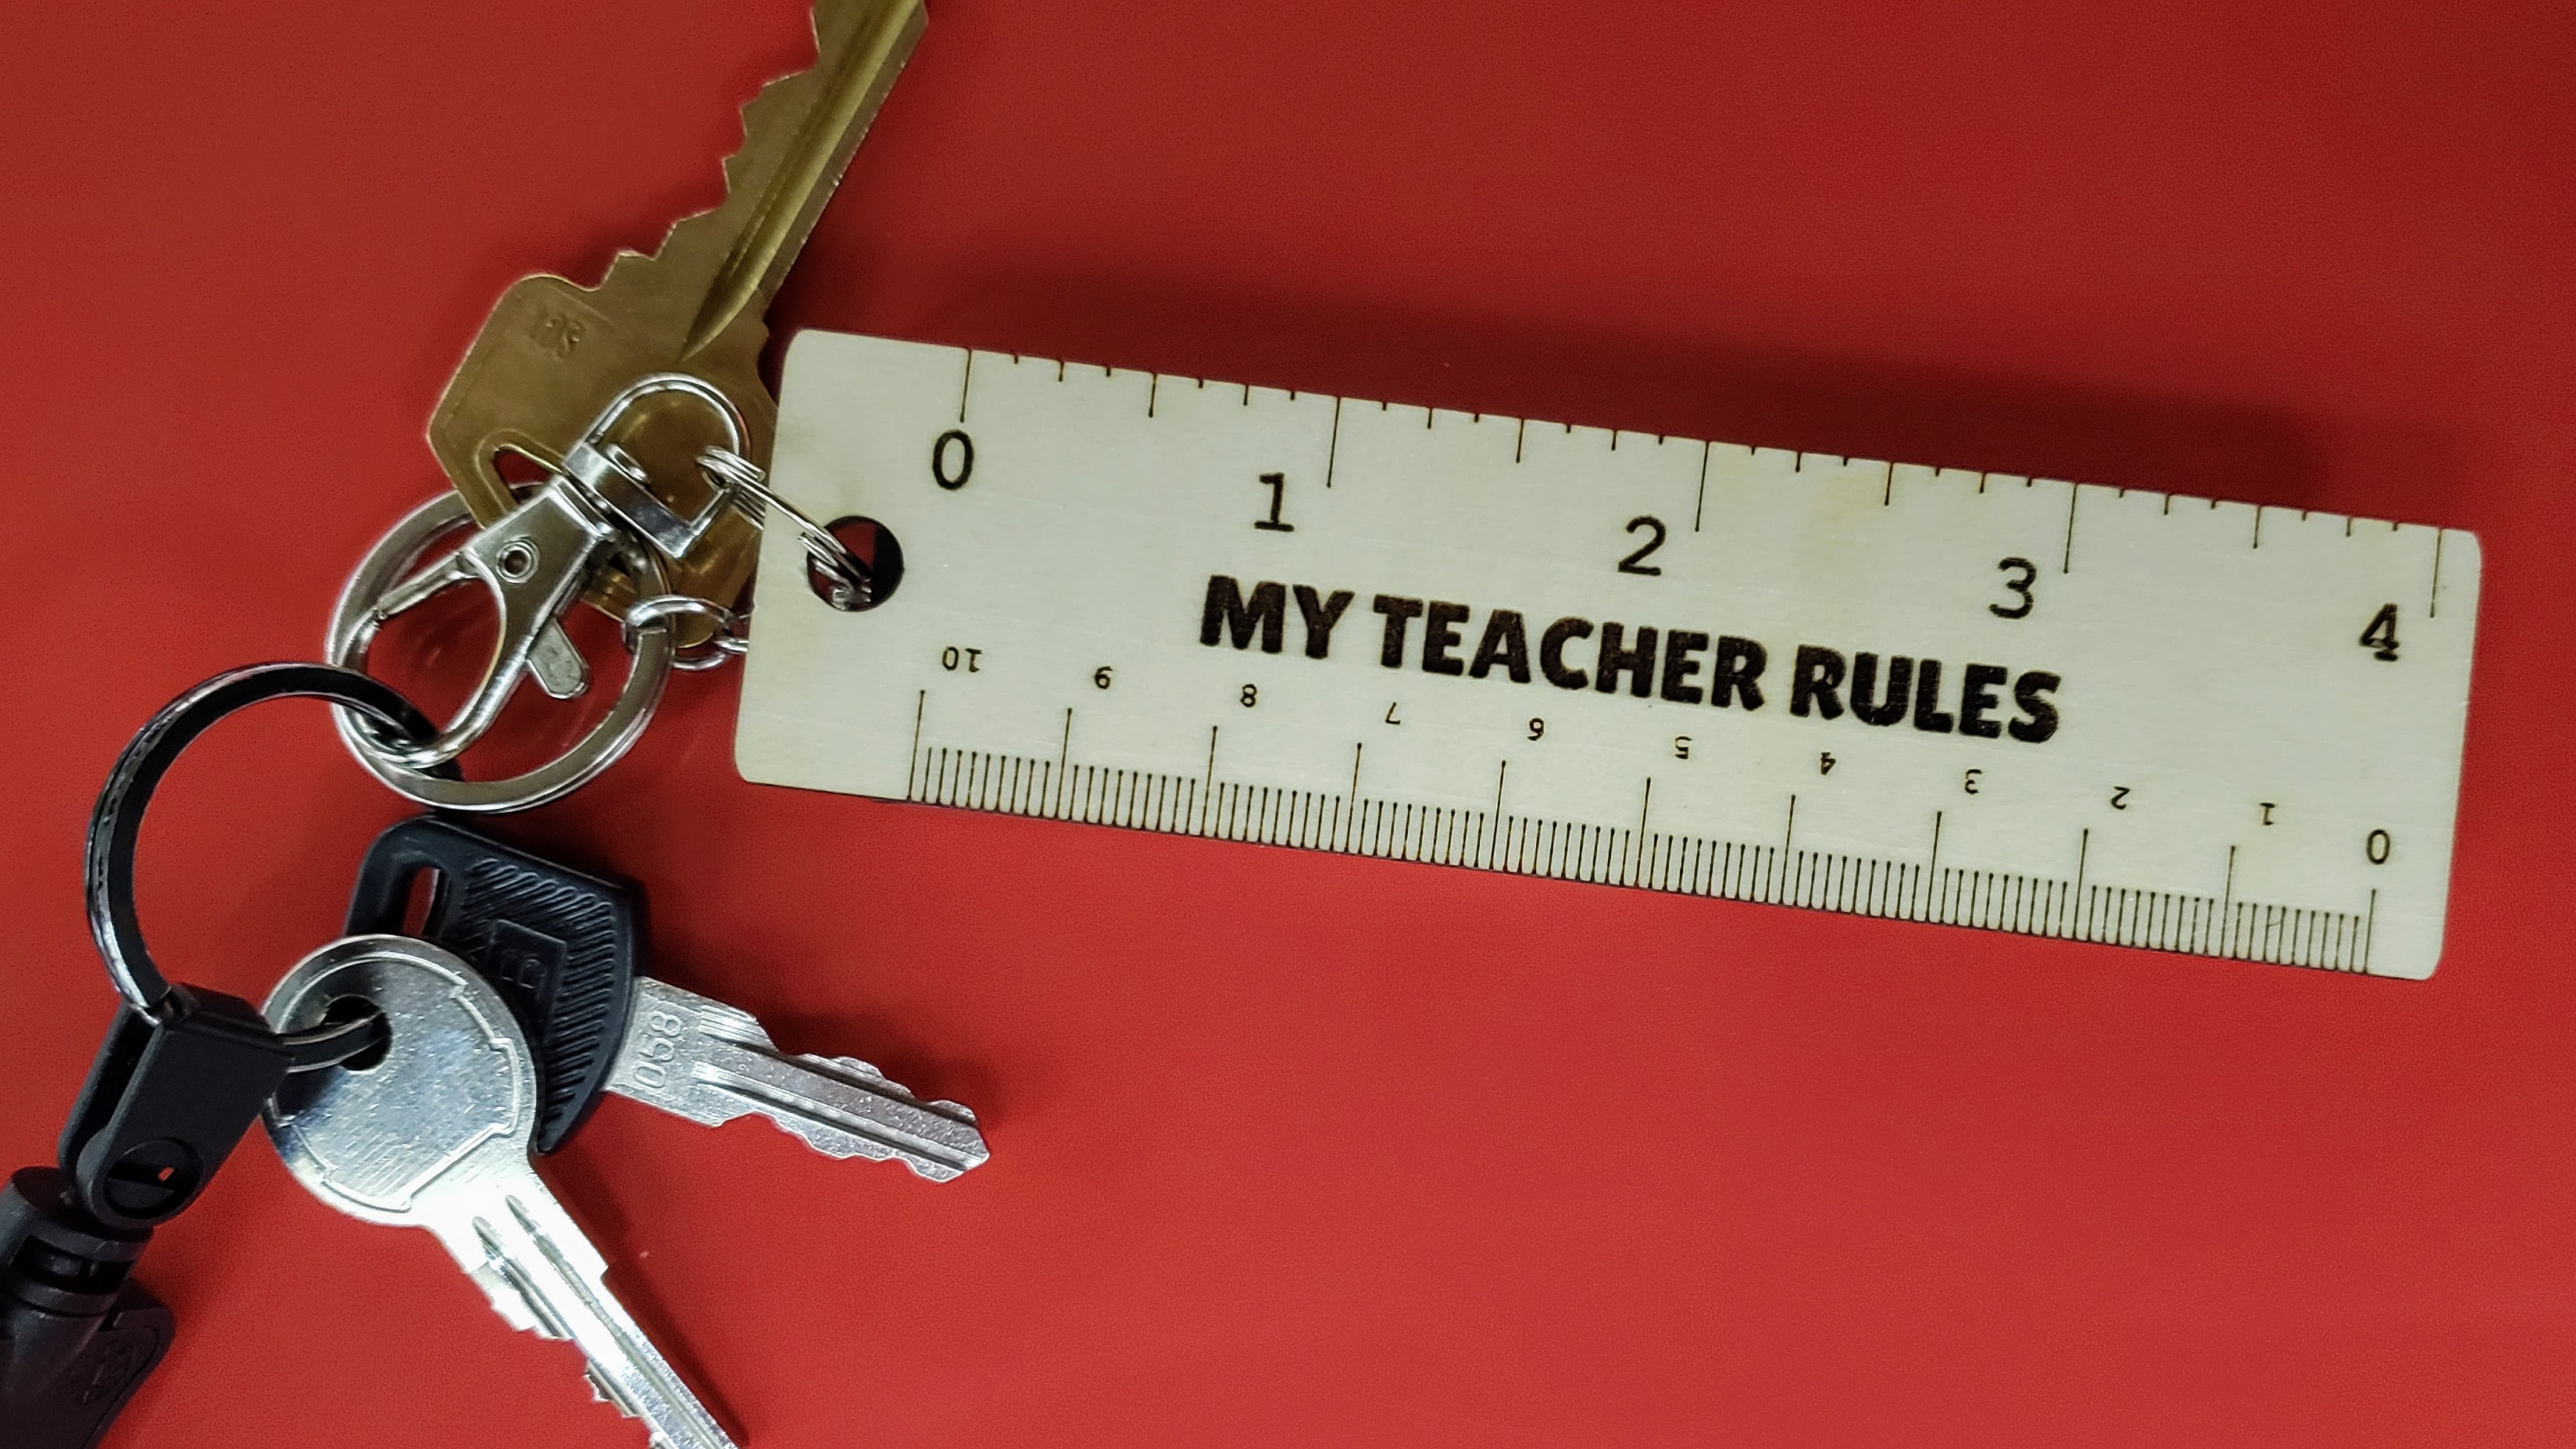 Wooden Keychain Ruler with text My Teacher Rules on a red background